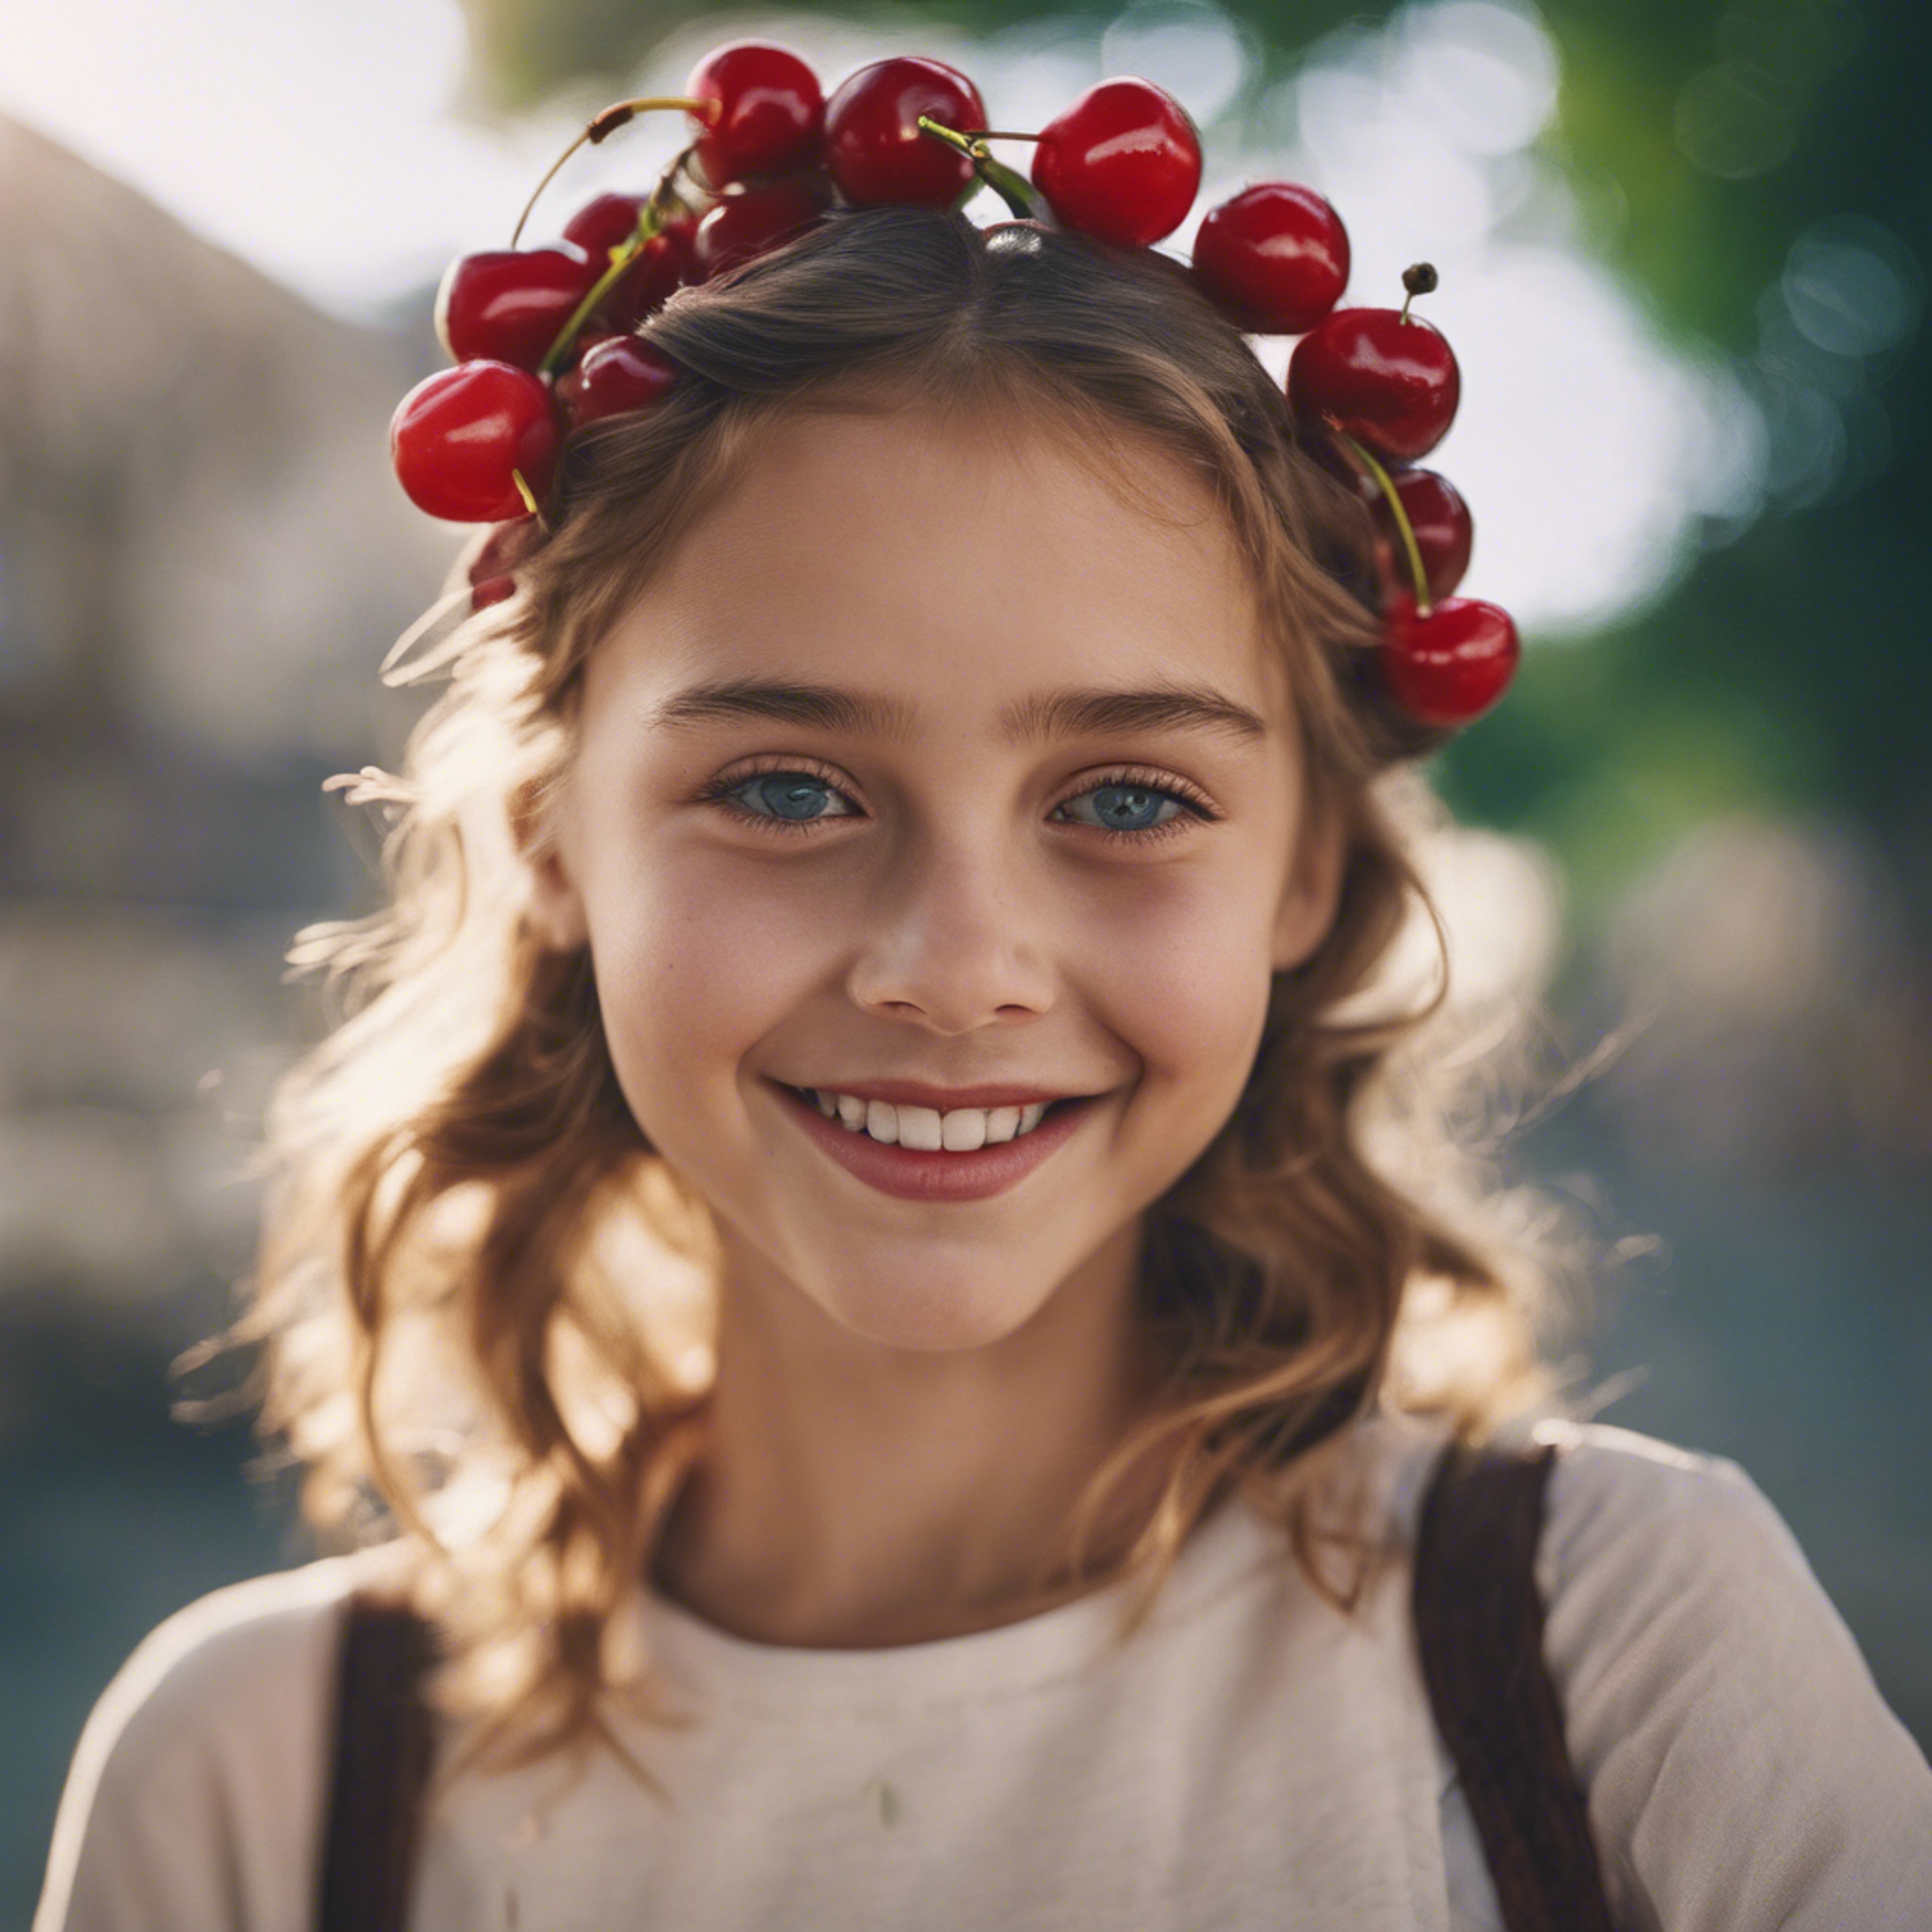 A girl with a cherry barrette in her hair, smiling at the viewer. Wallpaper[3ffde2b89a9346a6b02b]